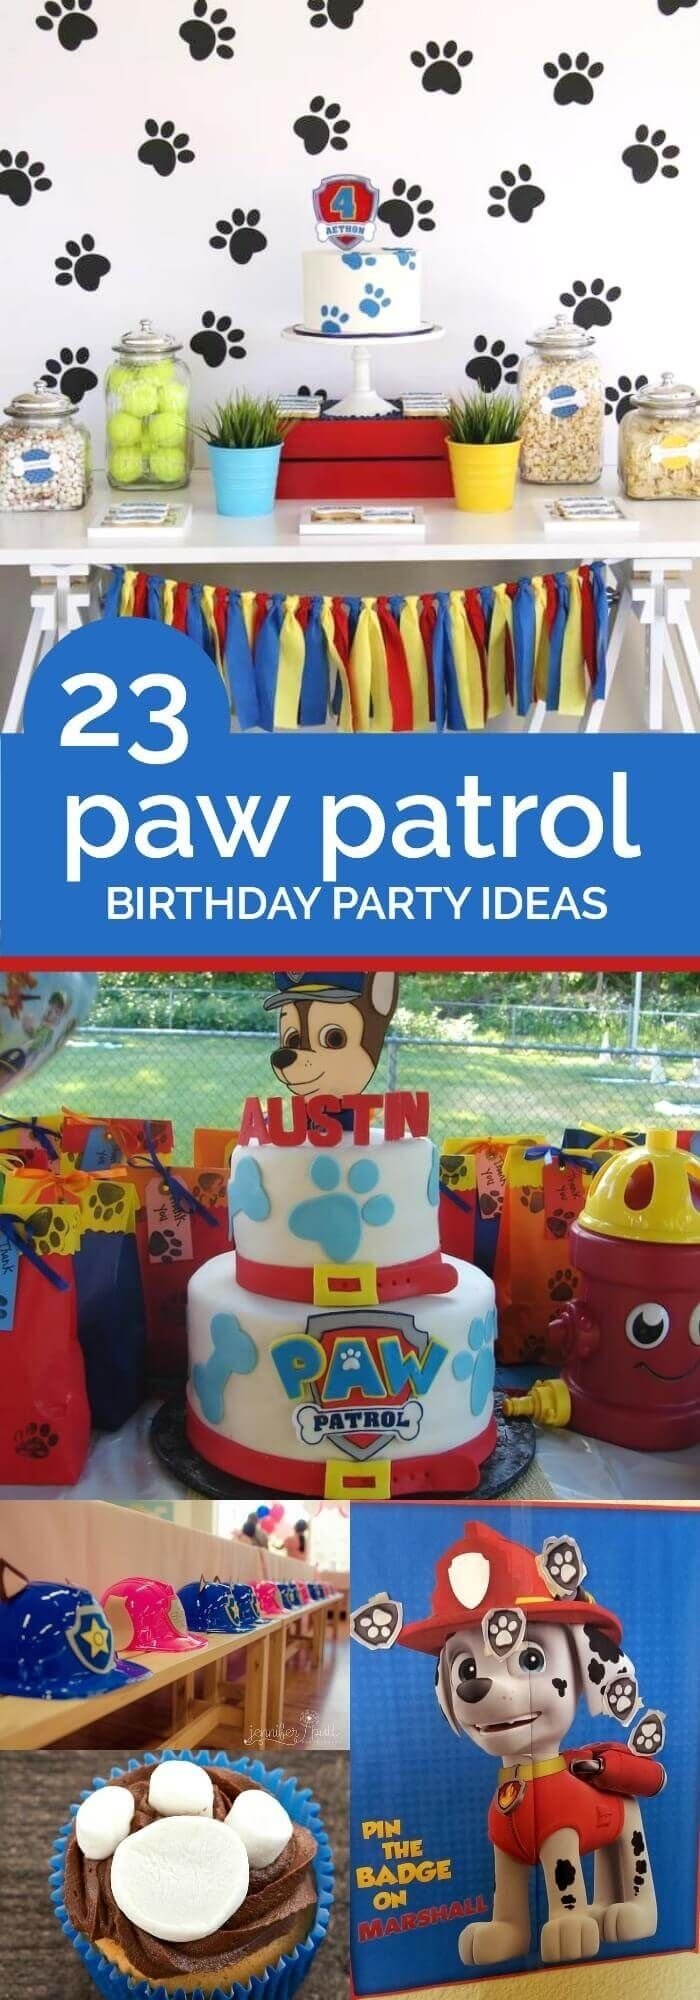 10 Pretty Birthday Party Ideas For 3 Year Old Boy 158 best paw patrol party ideas images on pinterest 2023